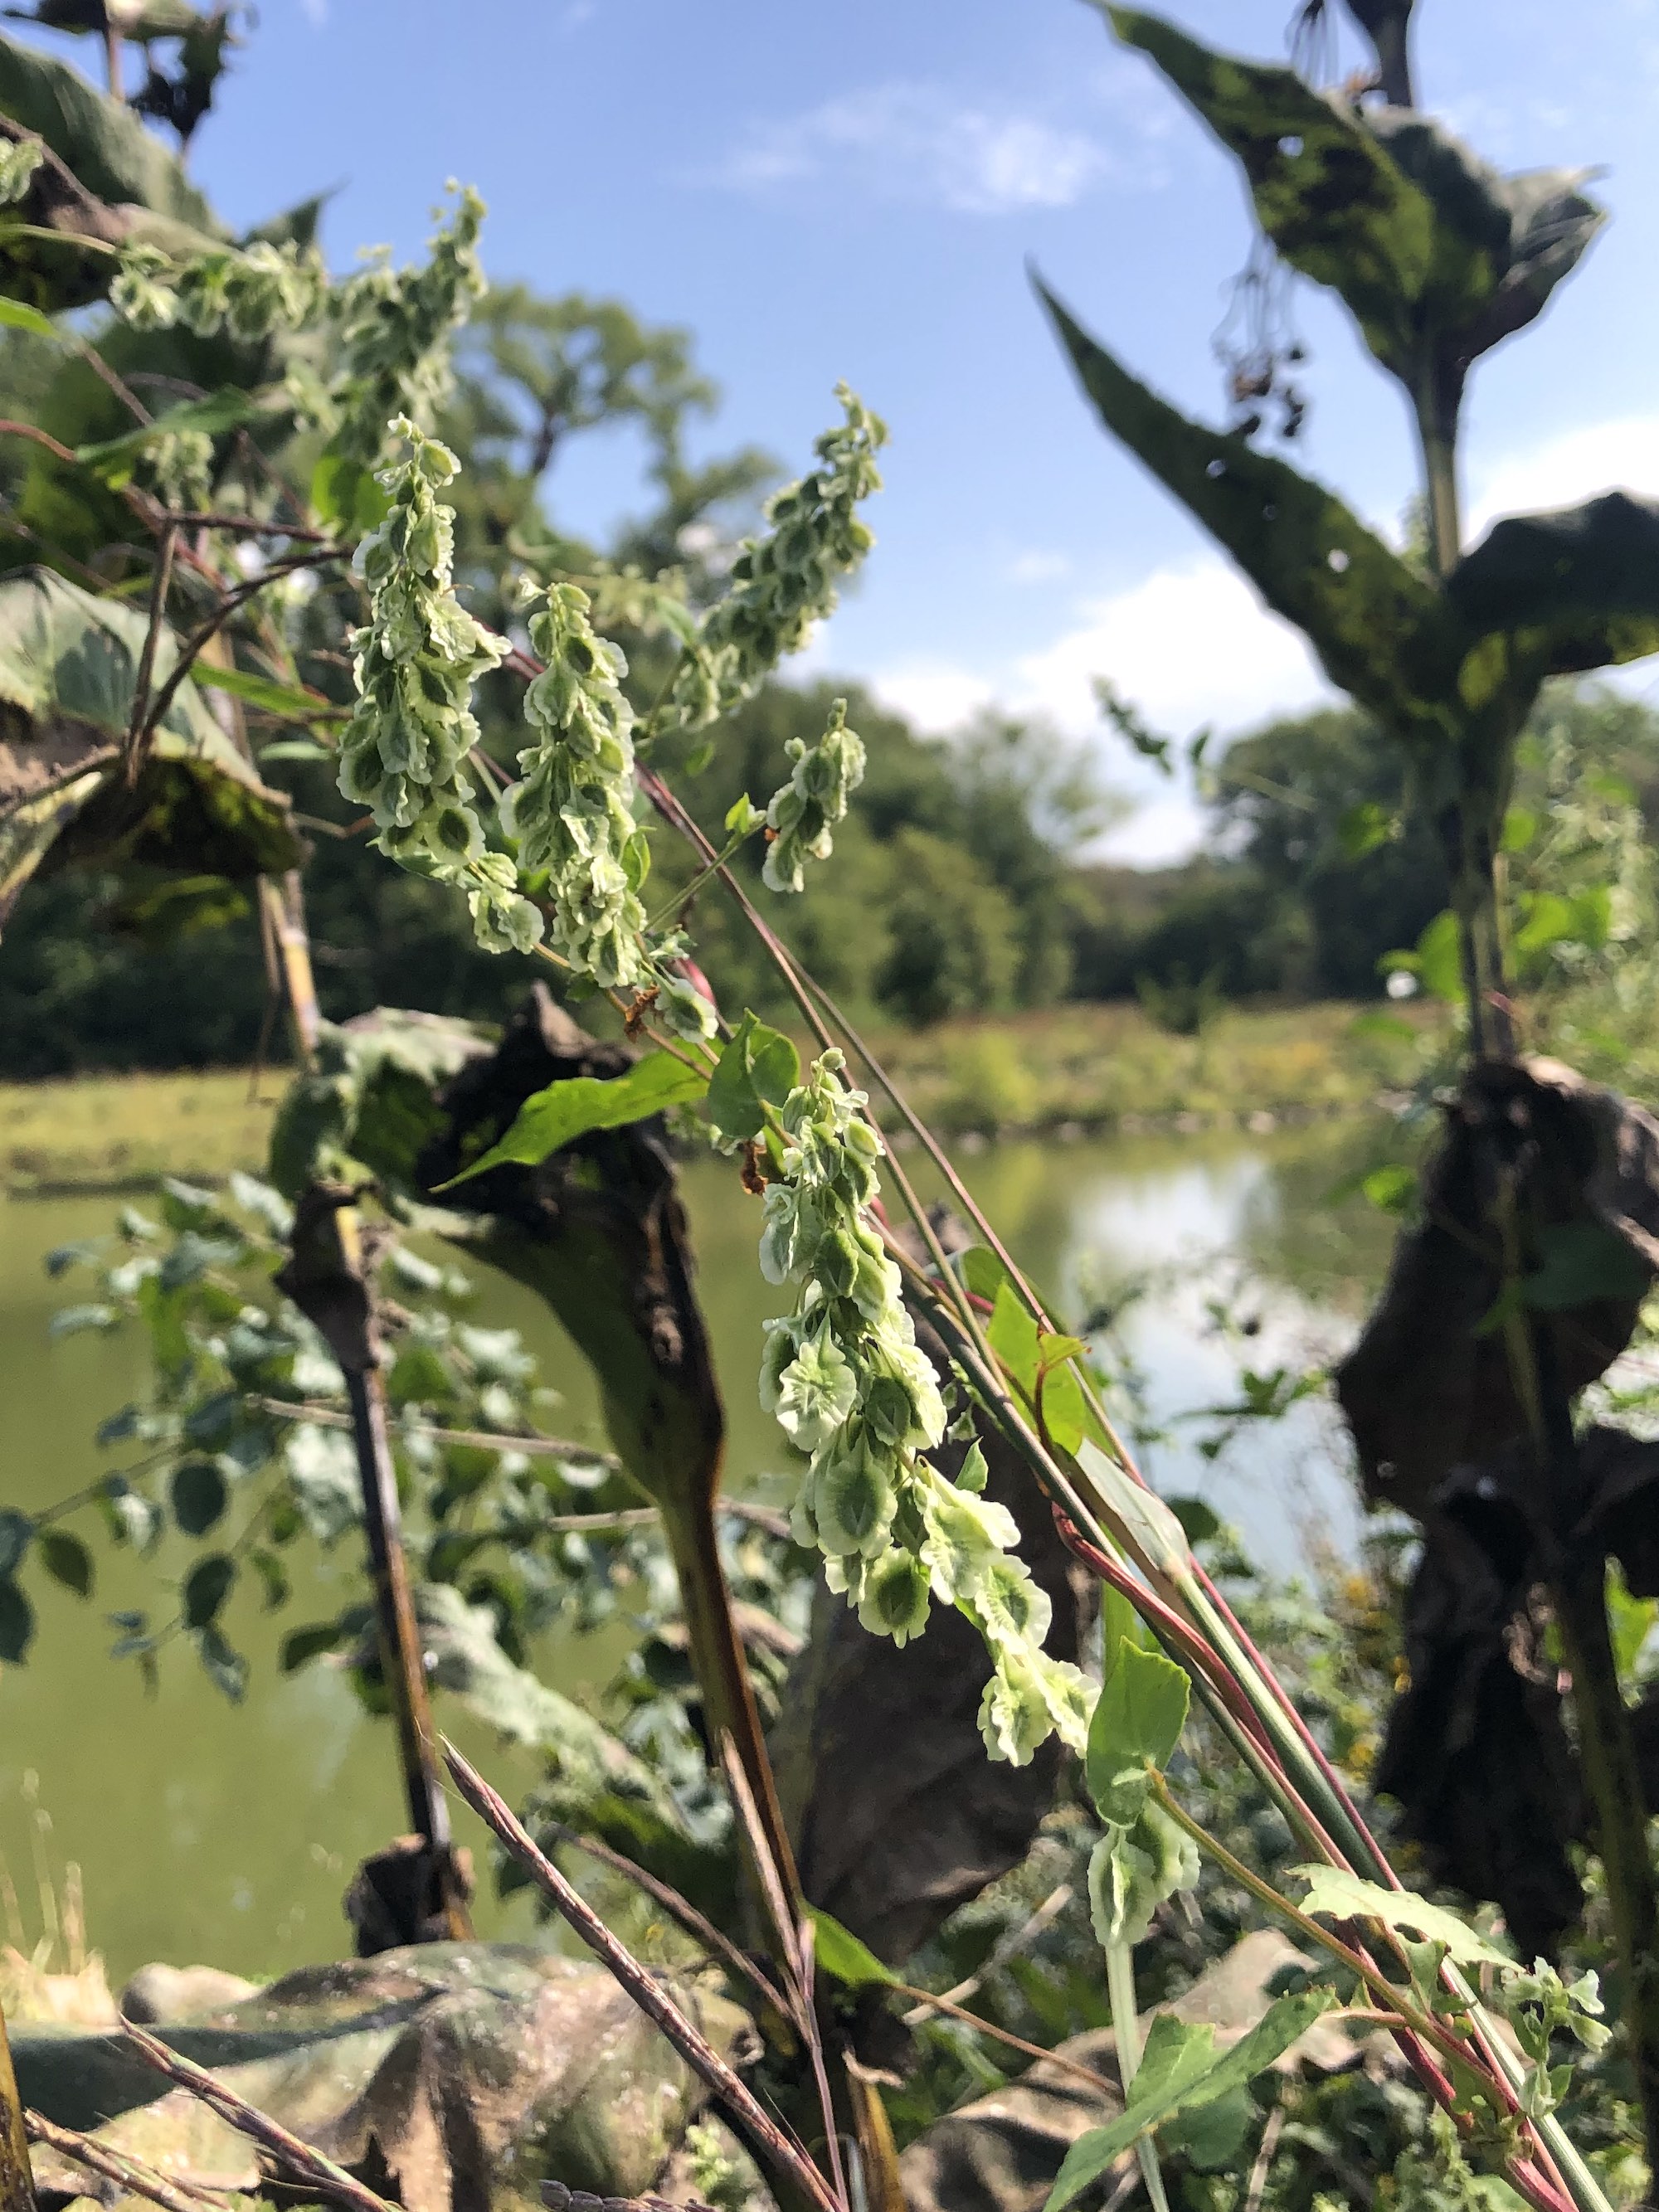 False Climbing Buckwheat on shore of Retaining Pond twining around dying Cup Plant in Madison, Wisconsin on September 16, 2022.